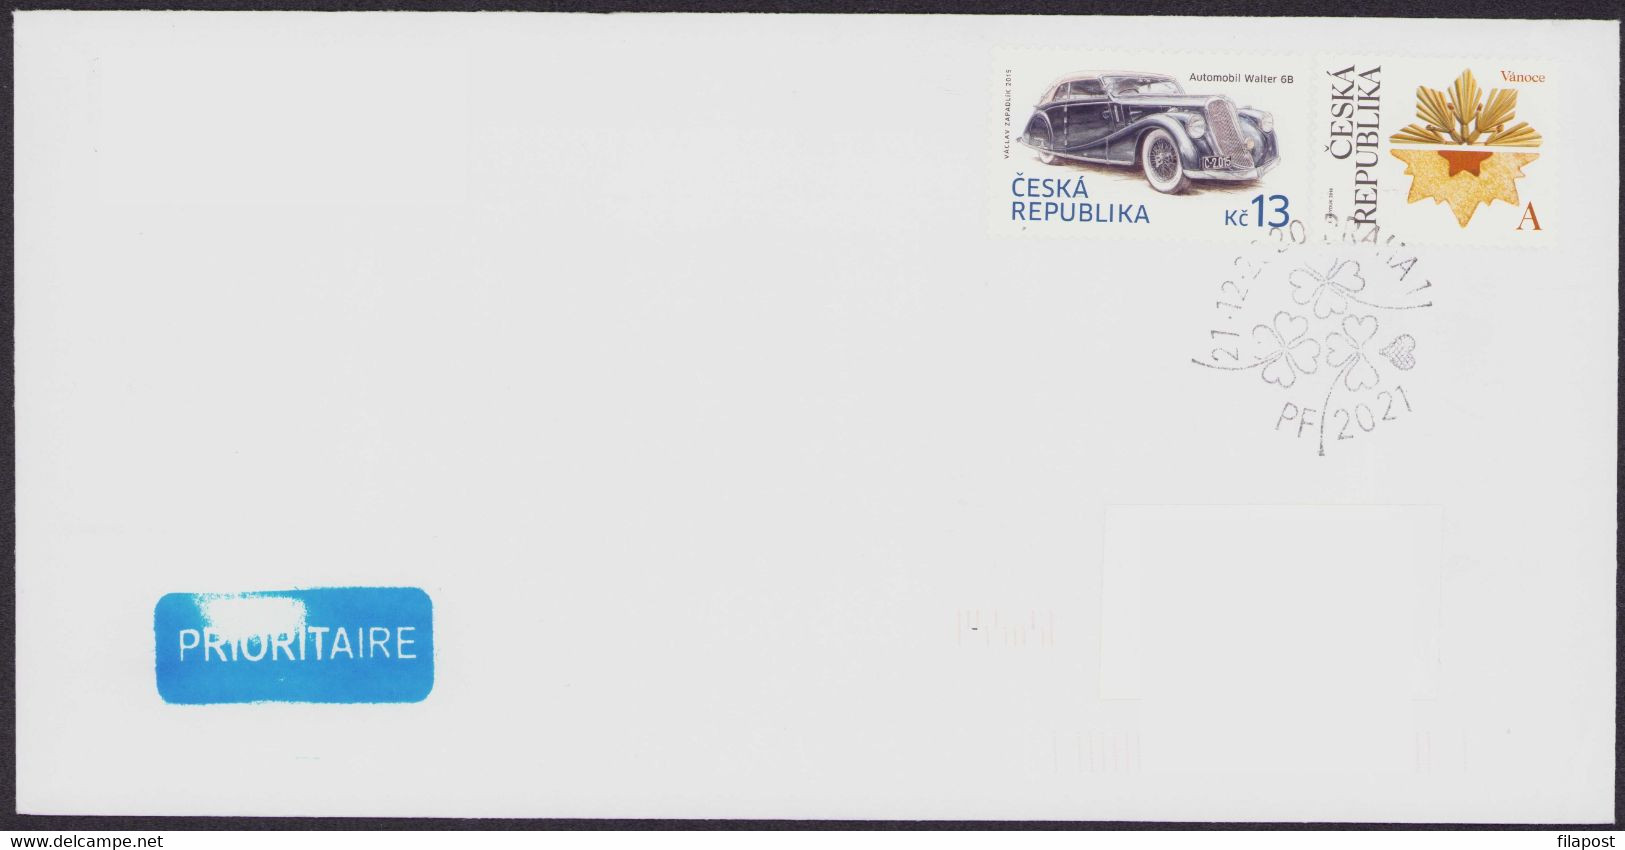 Czech Republic 2015 Stamped Cover / Priority / Automobil Walter 6B / P66 - Covers